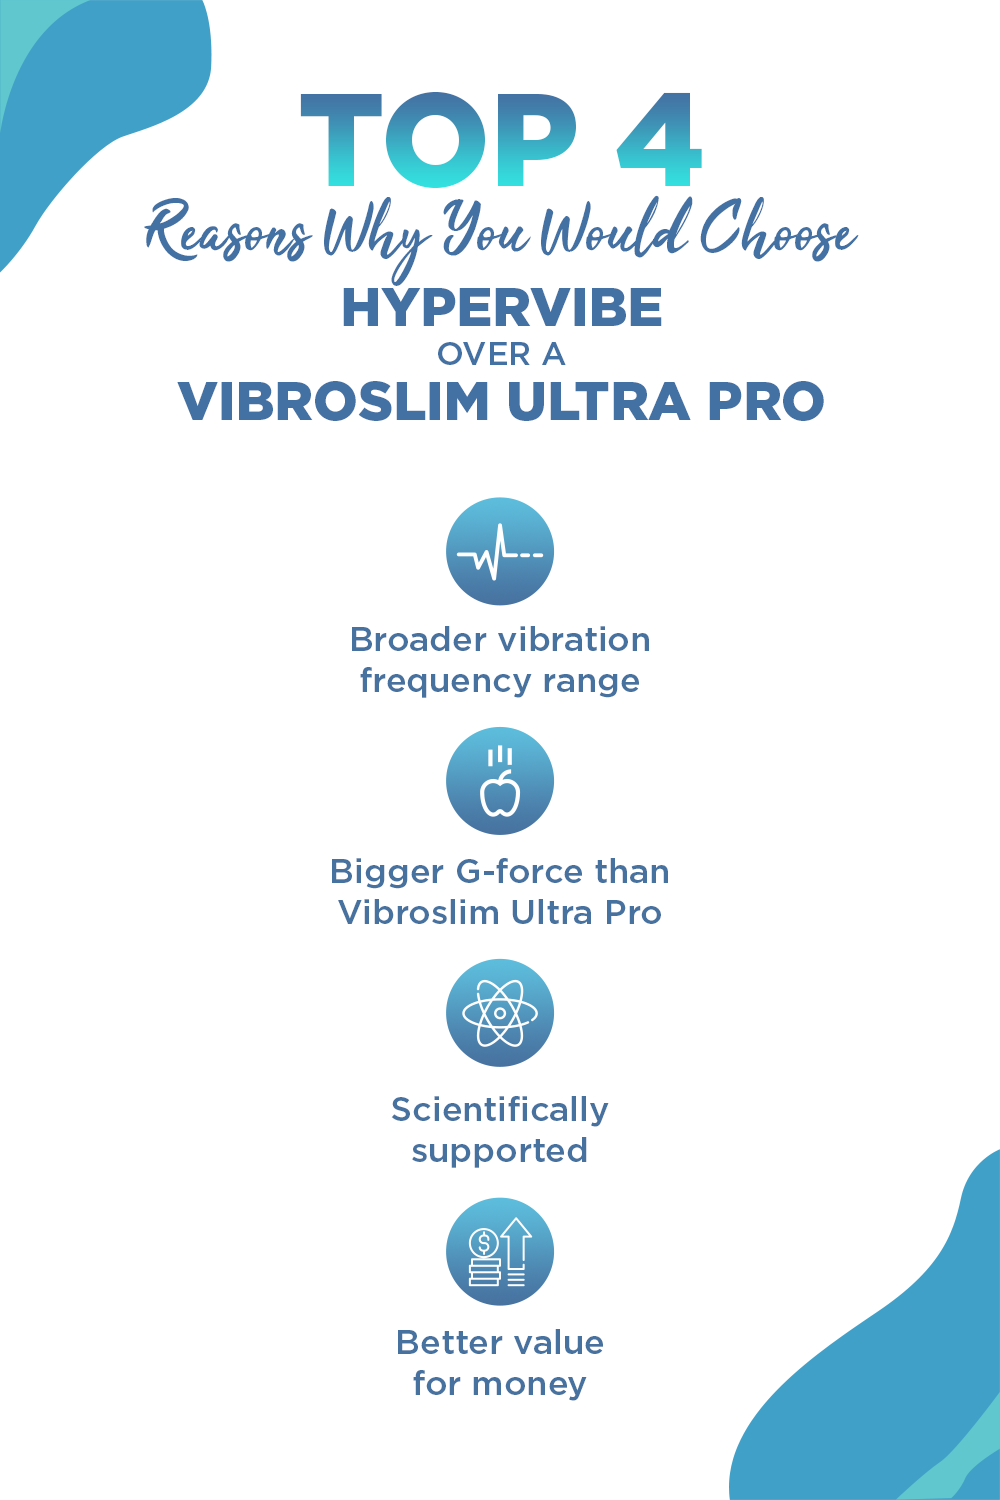 which is better Hypervibe or vibroslim